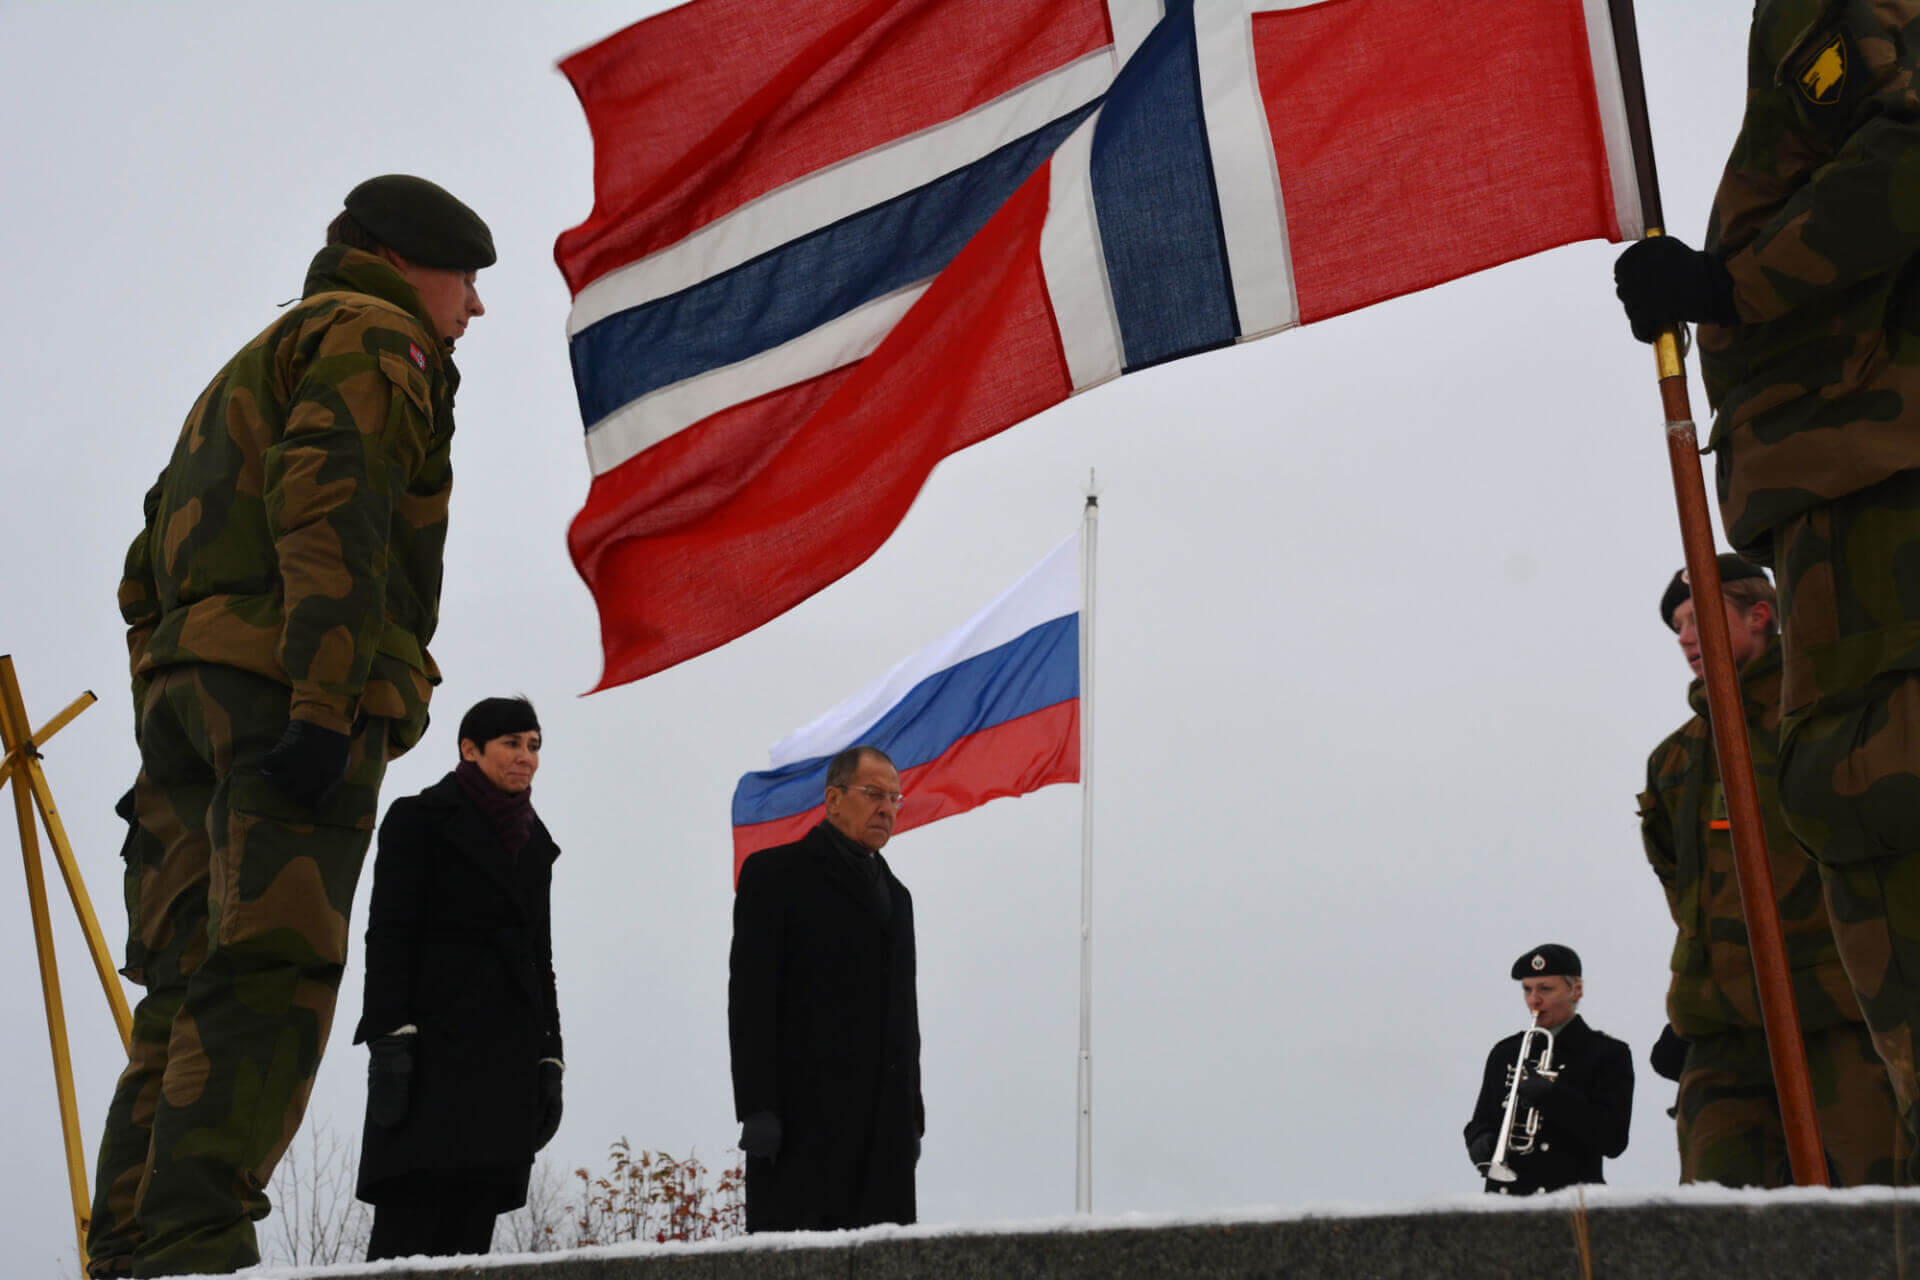 Norwegian Citizen Arrested for Leaking Confidential Information to Russia